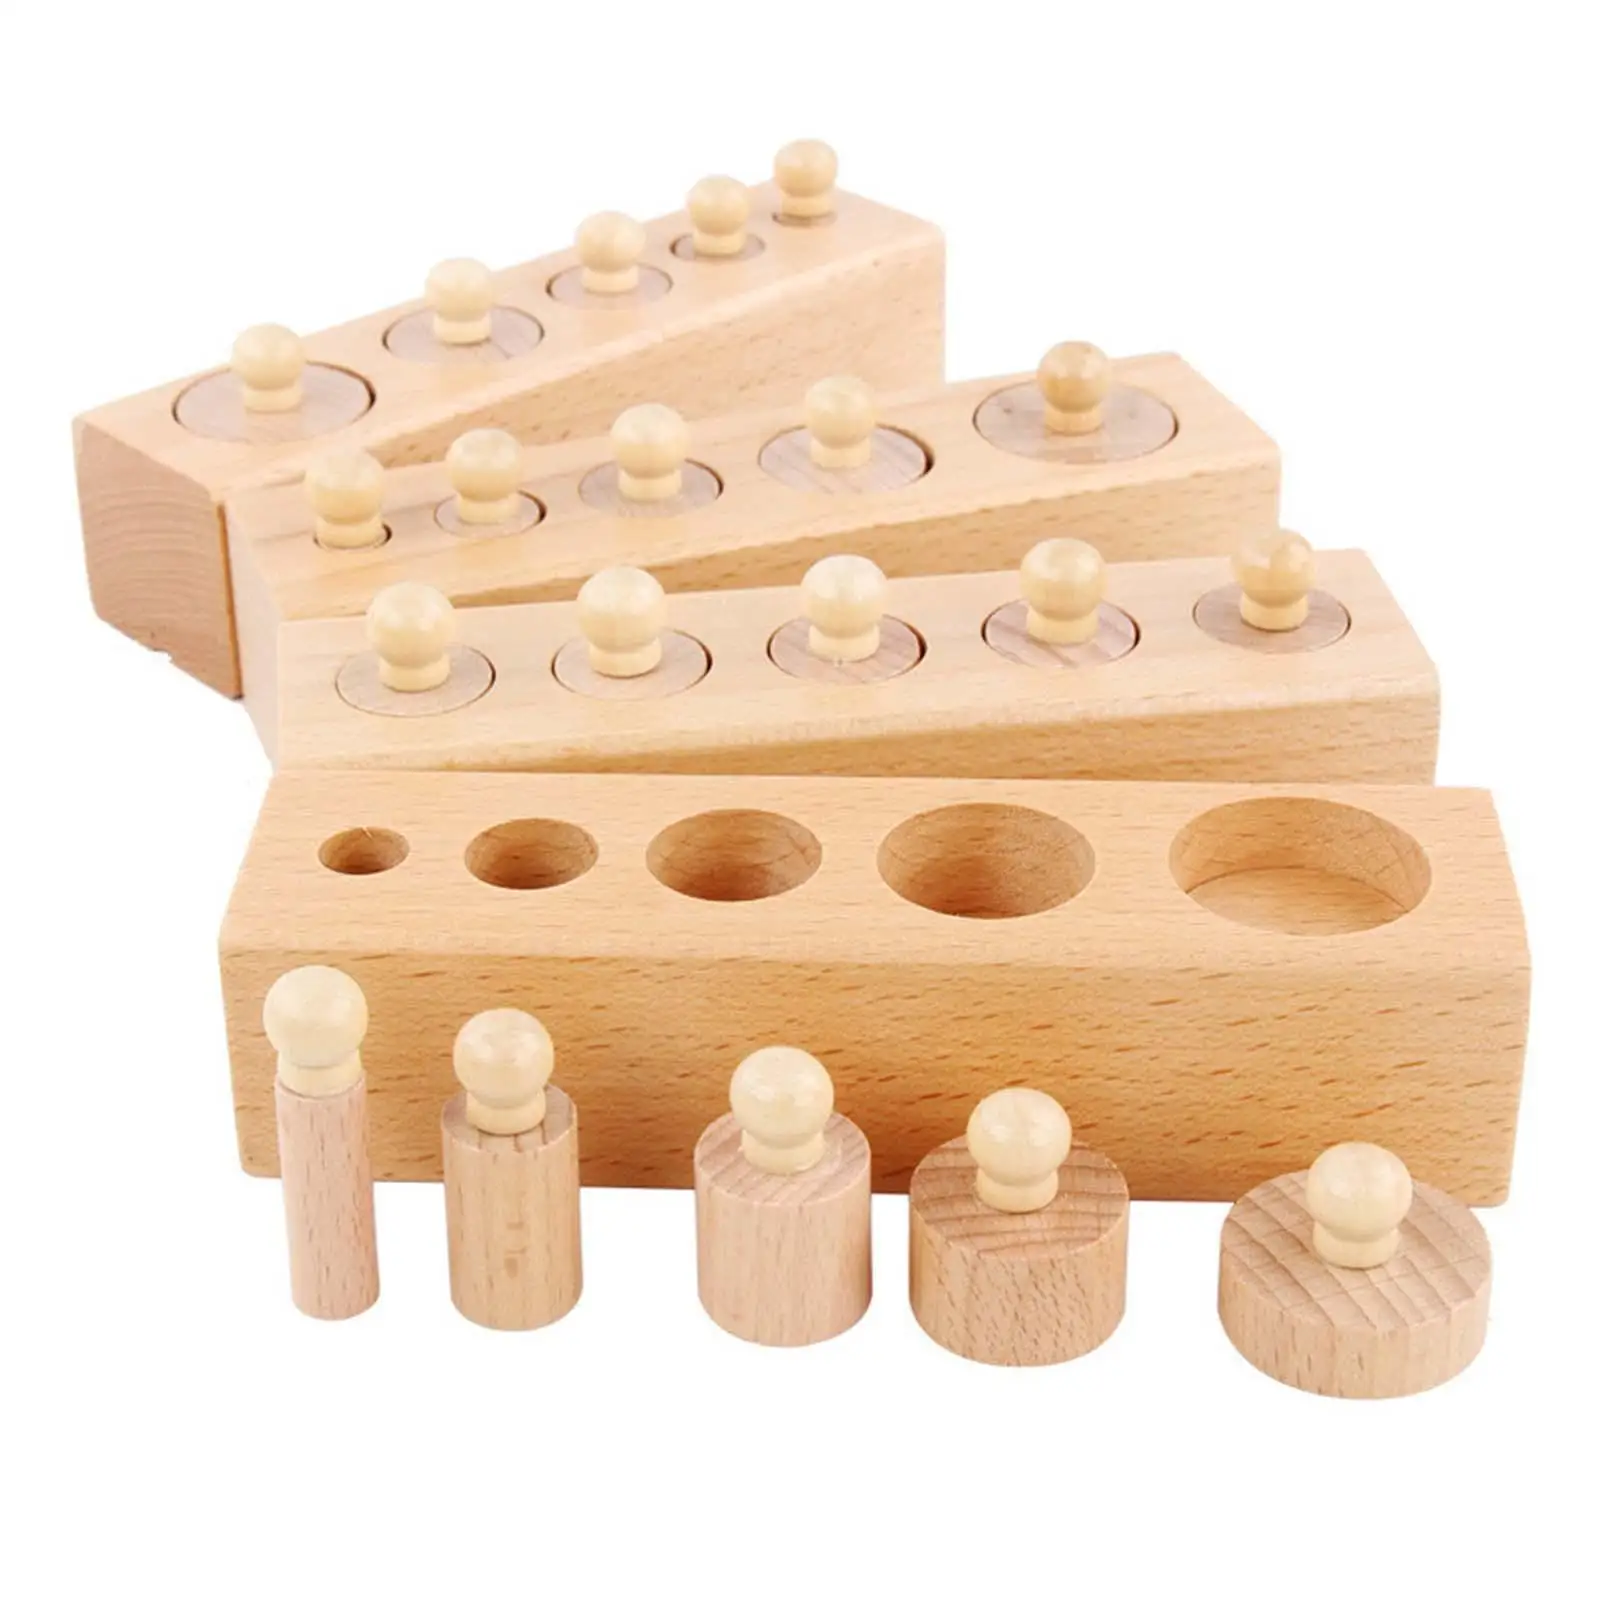 4 Pieces Wooden Cylinders Ladder Blocks Educational Grouping Shape Sorting Montessori Knobbed Cylinders for Home School Childern